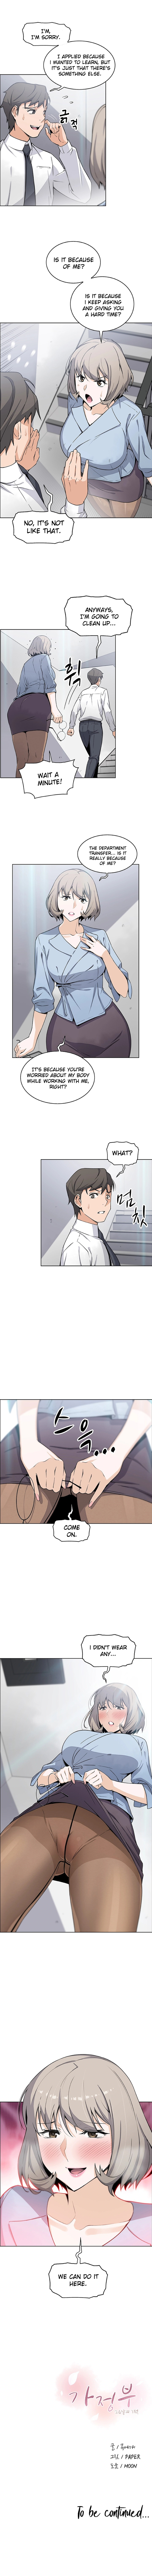 Housekeeper Manhwa - Chapter 29 Page 8